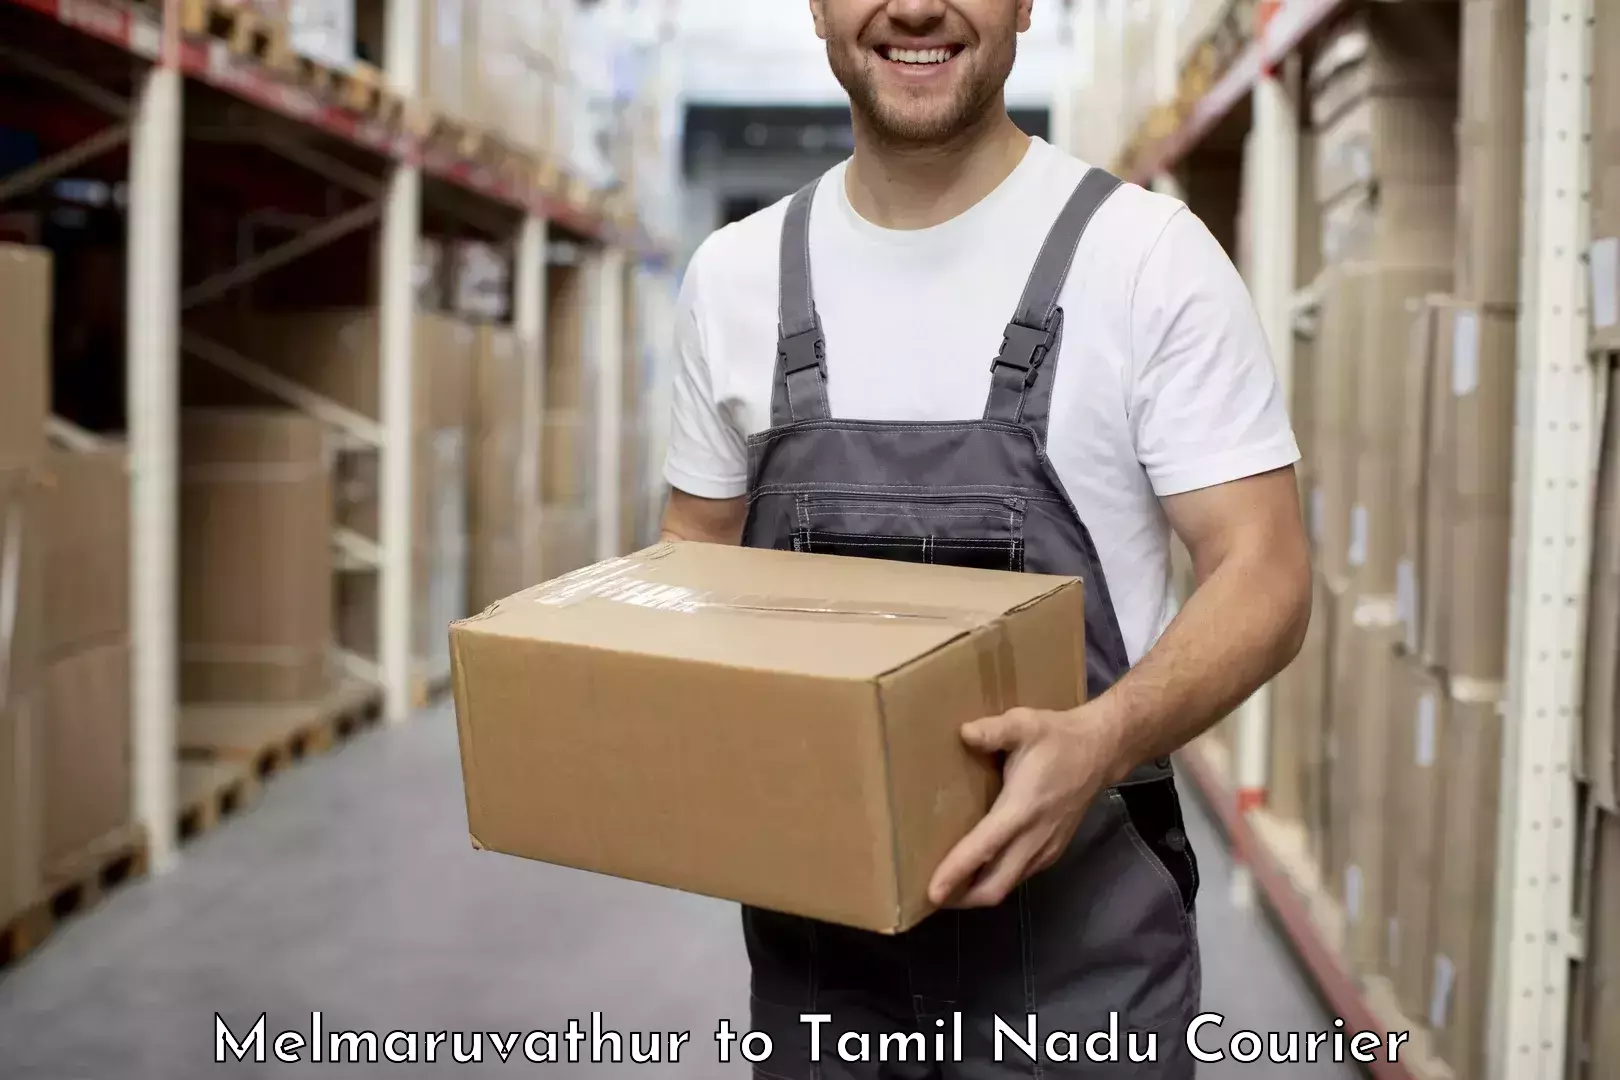 Overnight delivery services Melmaruvathur to Vellore